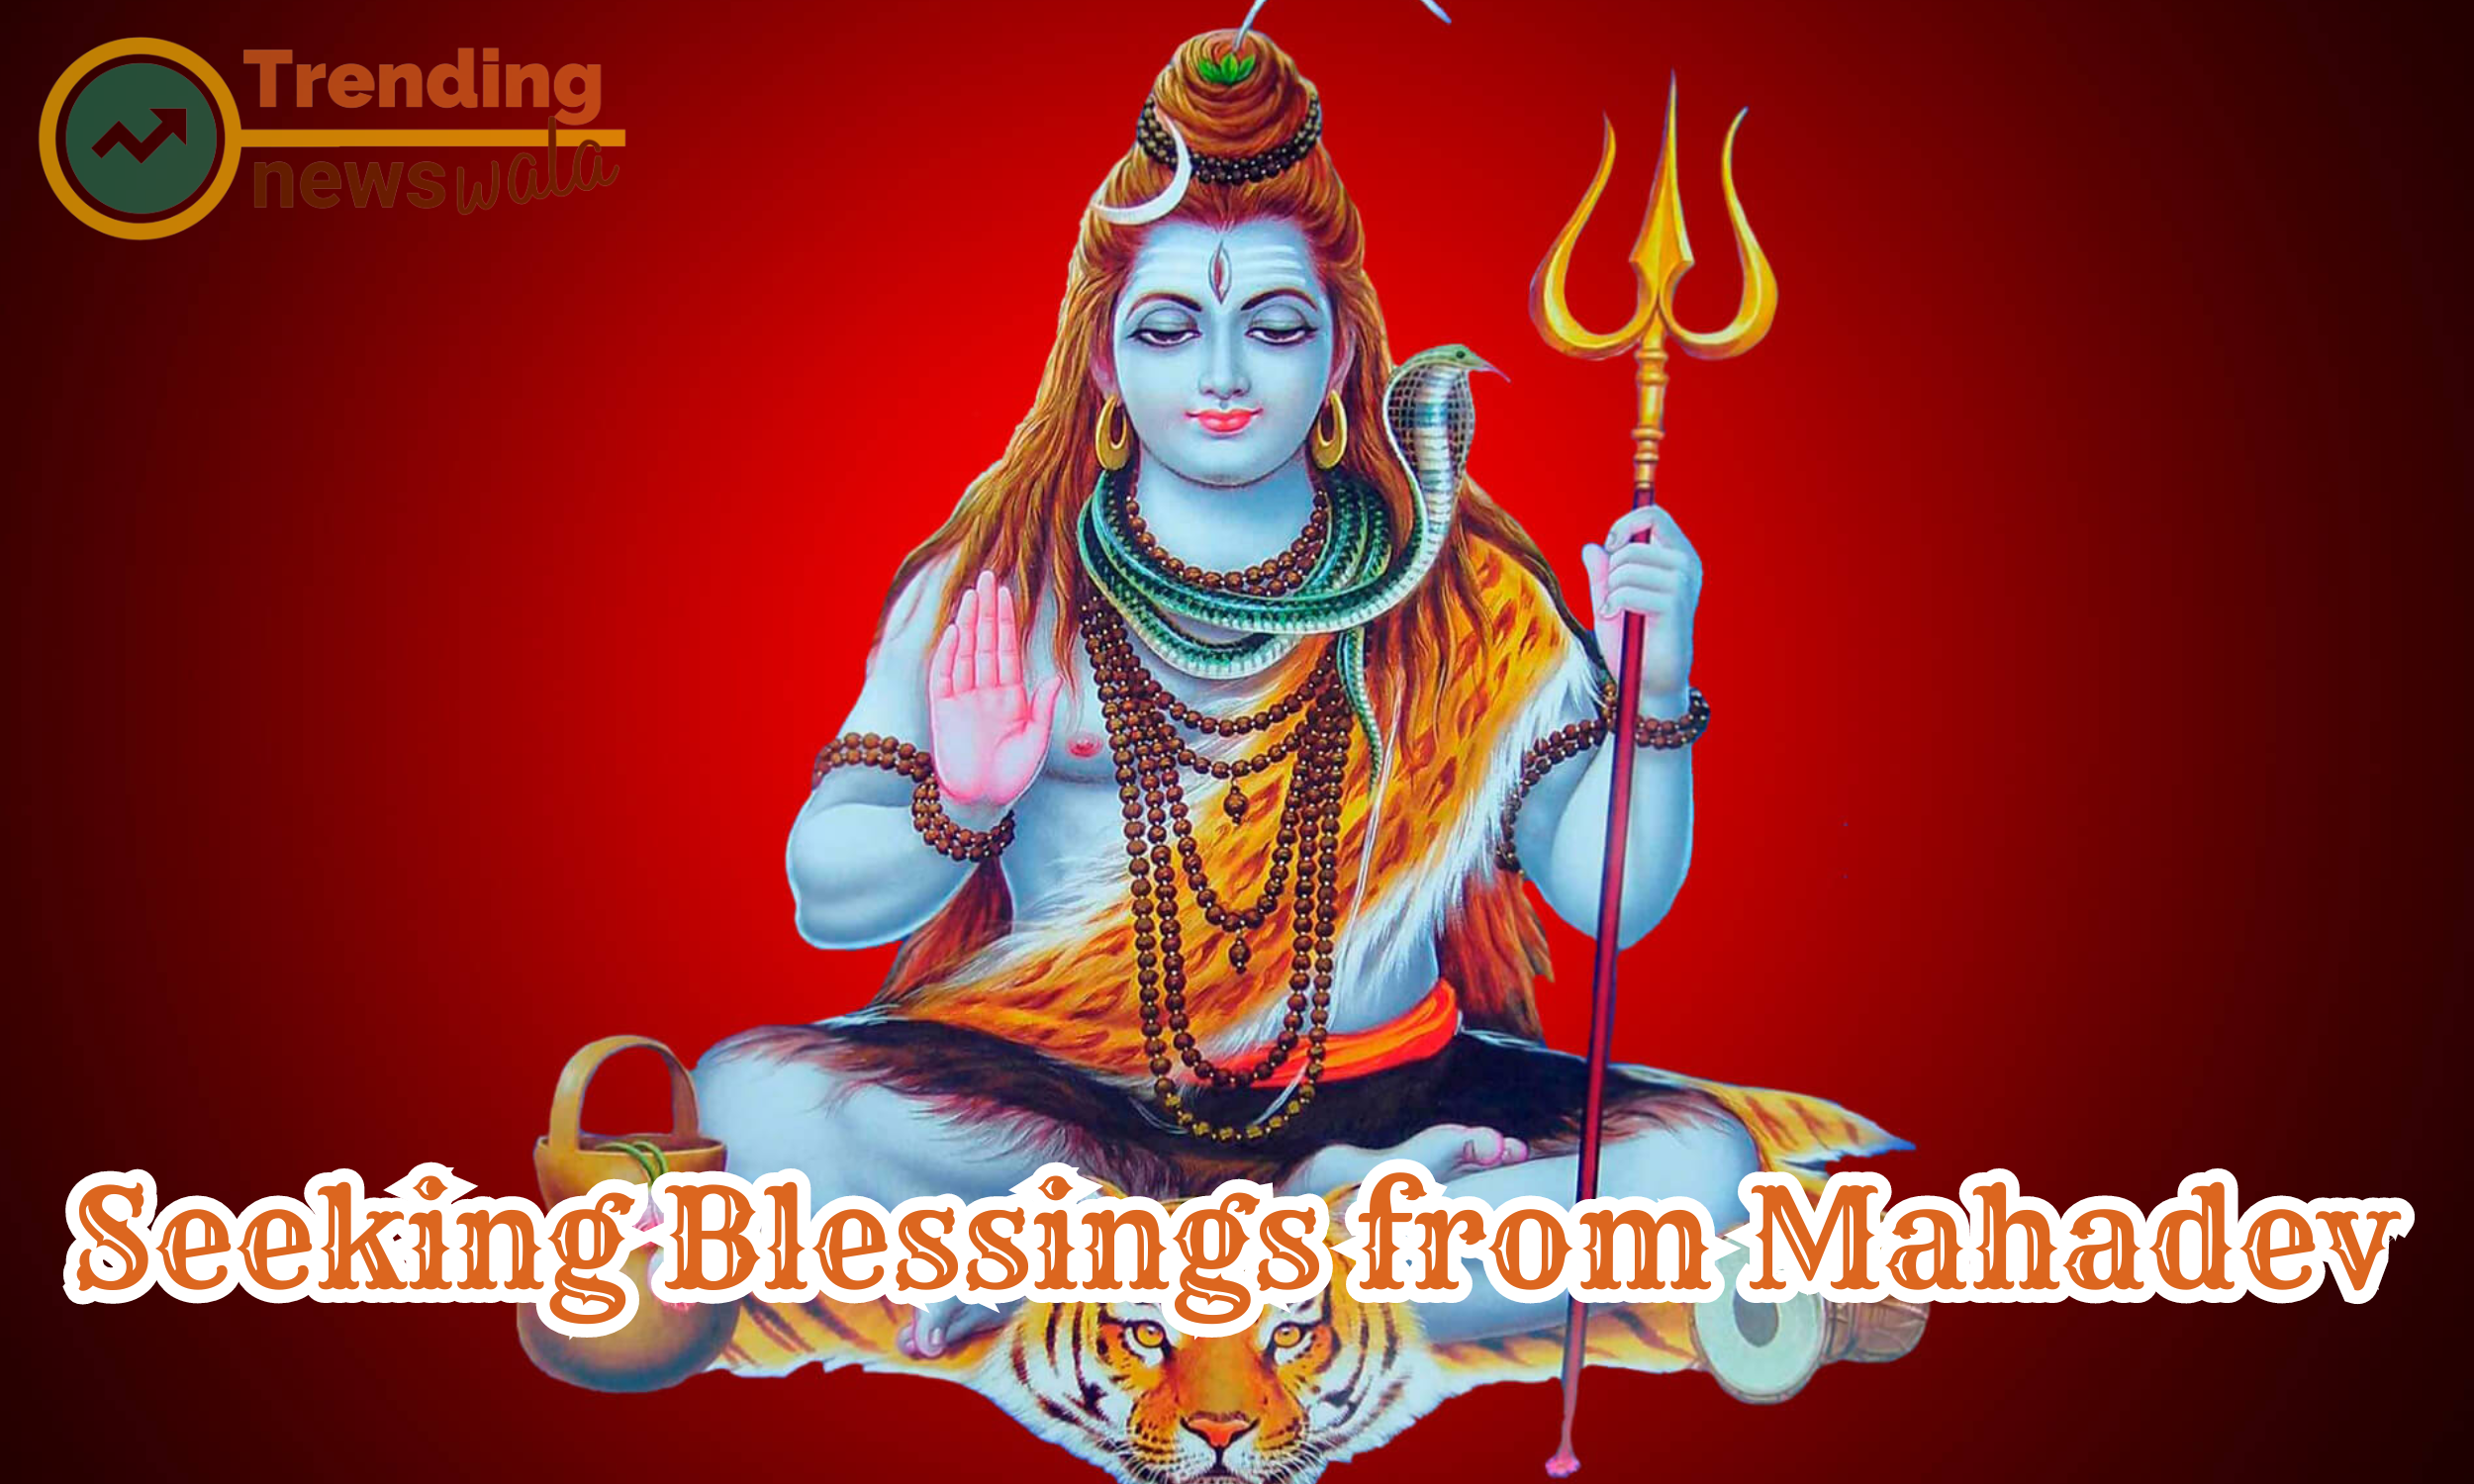 Seeking blessings from Mahadev is a sacred and heartfelt practice for devotees in Hinduism